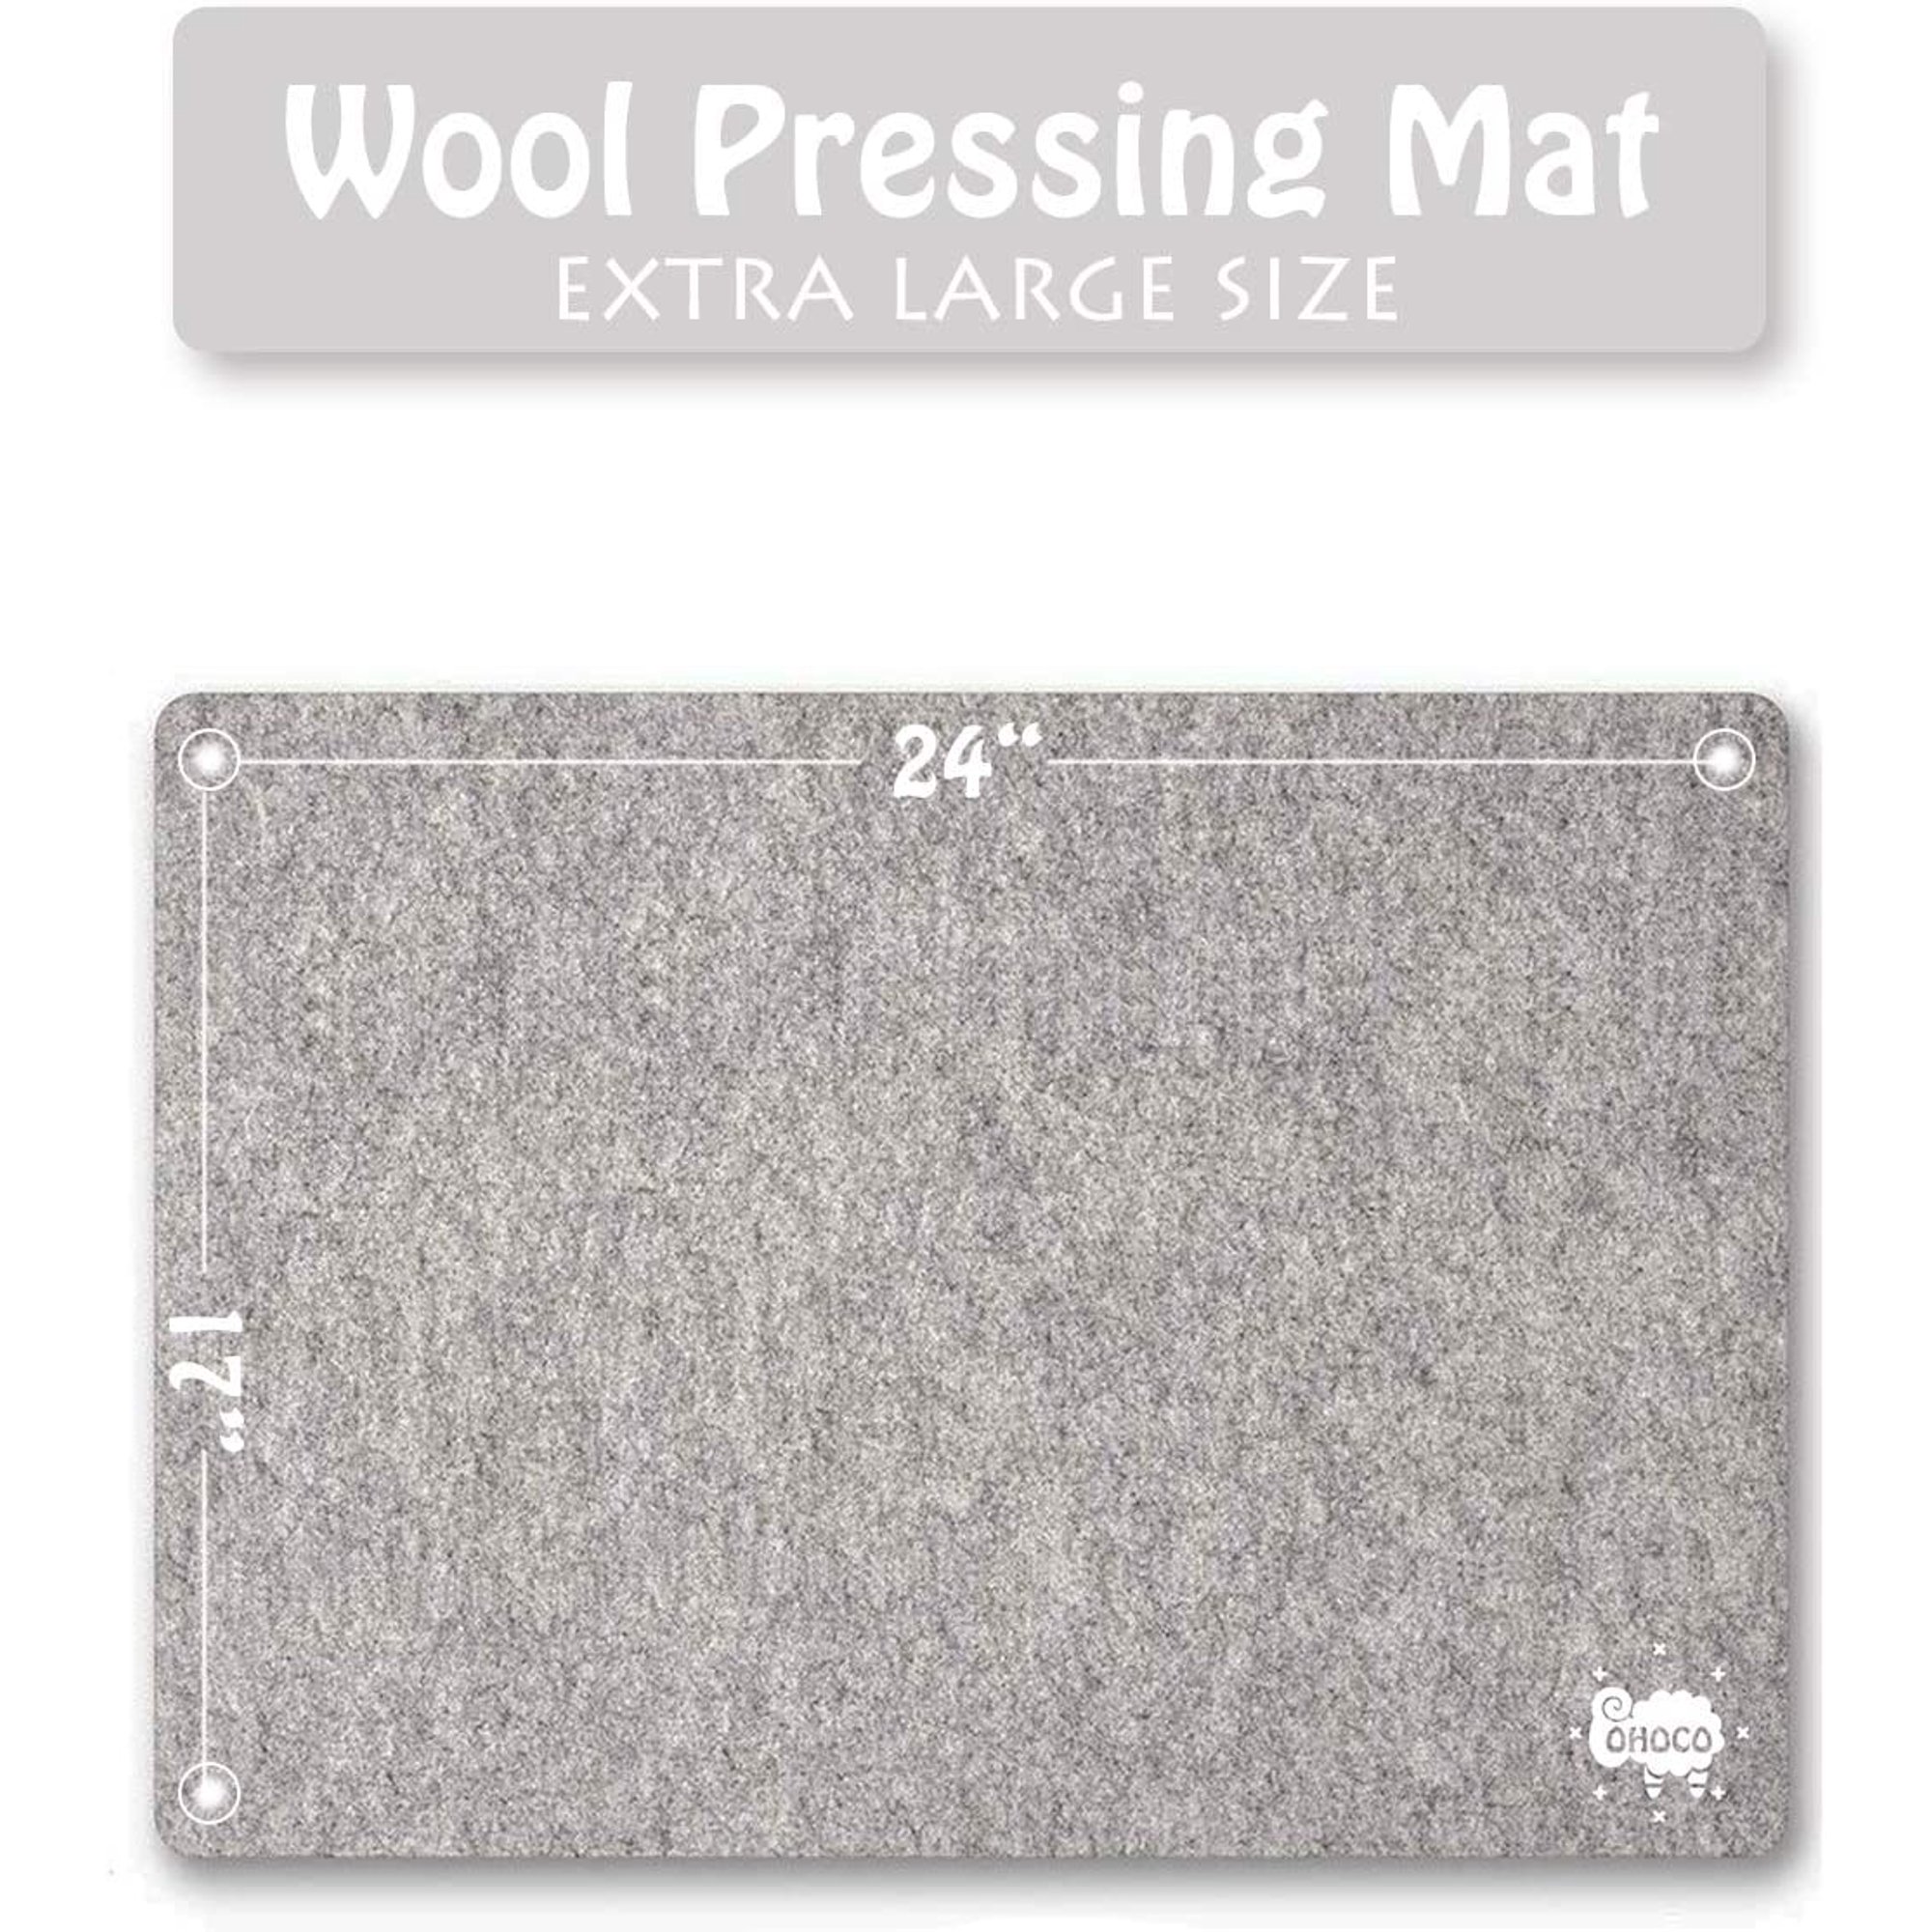 Wool Pressing Mat for Quilting - 22x60 XL Extra Large Felt Ironing